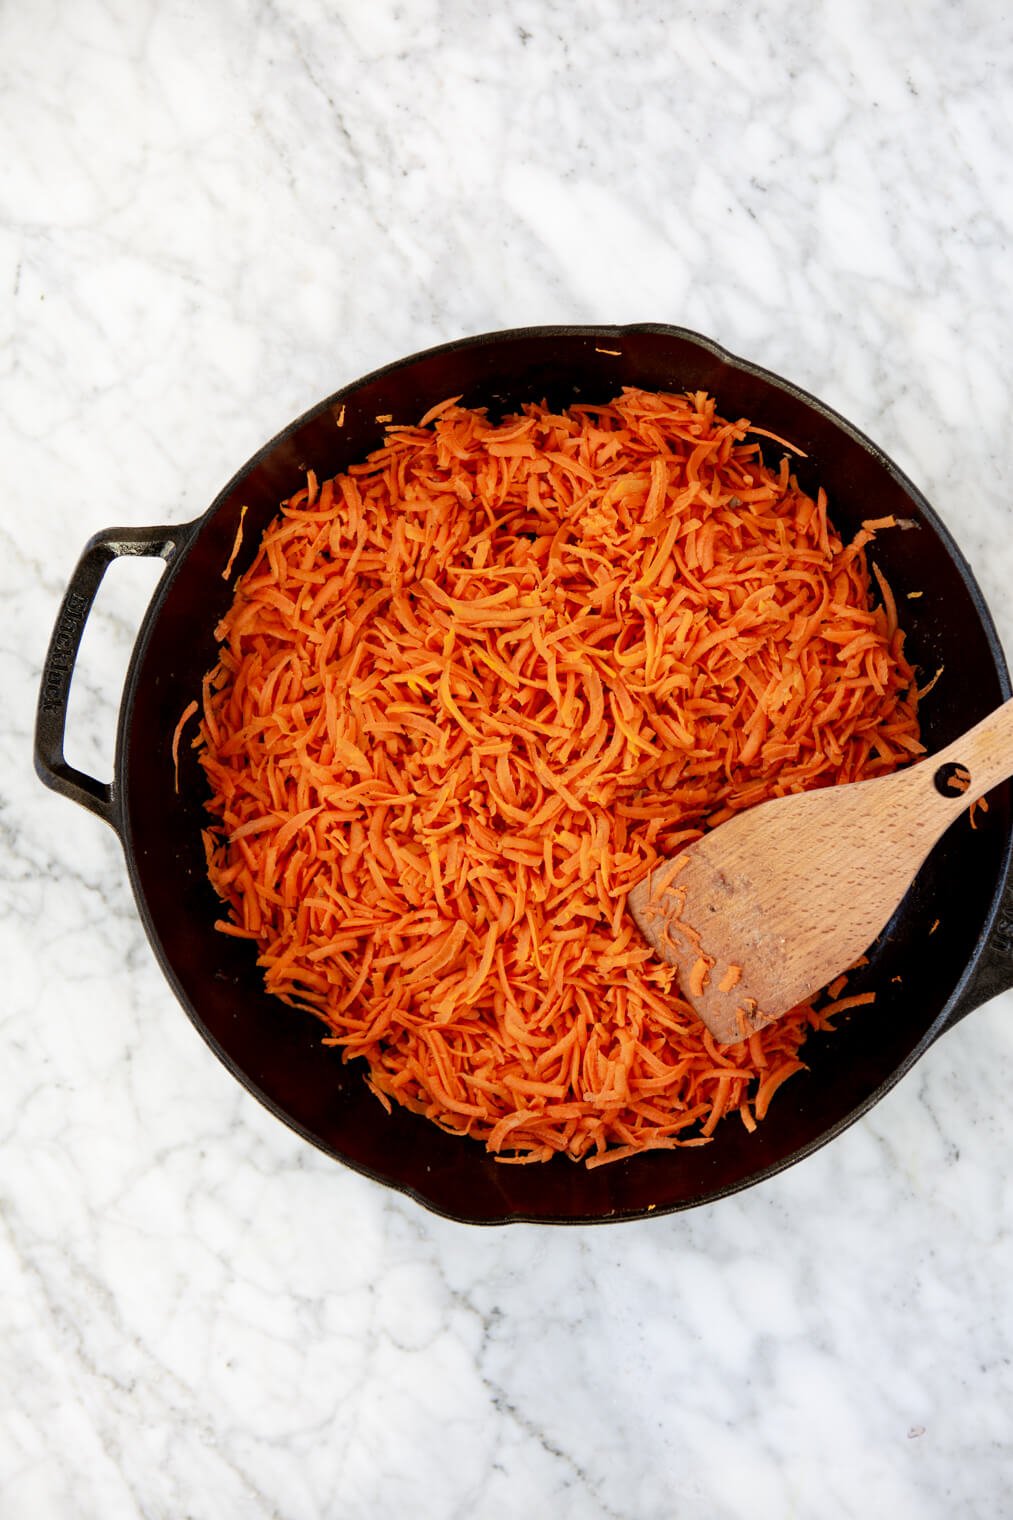 Cast iron skillet with shredded carrots evenly spread on bottom and wooden spatula.